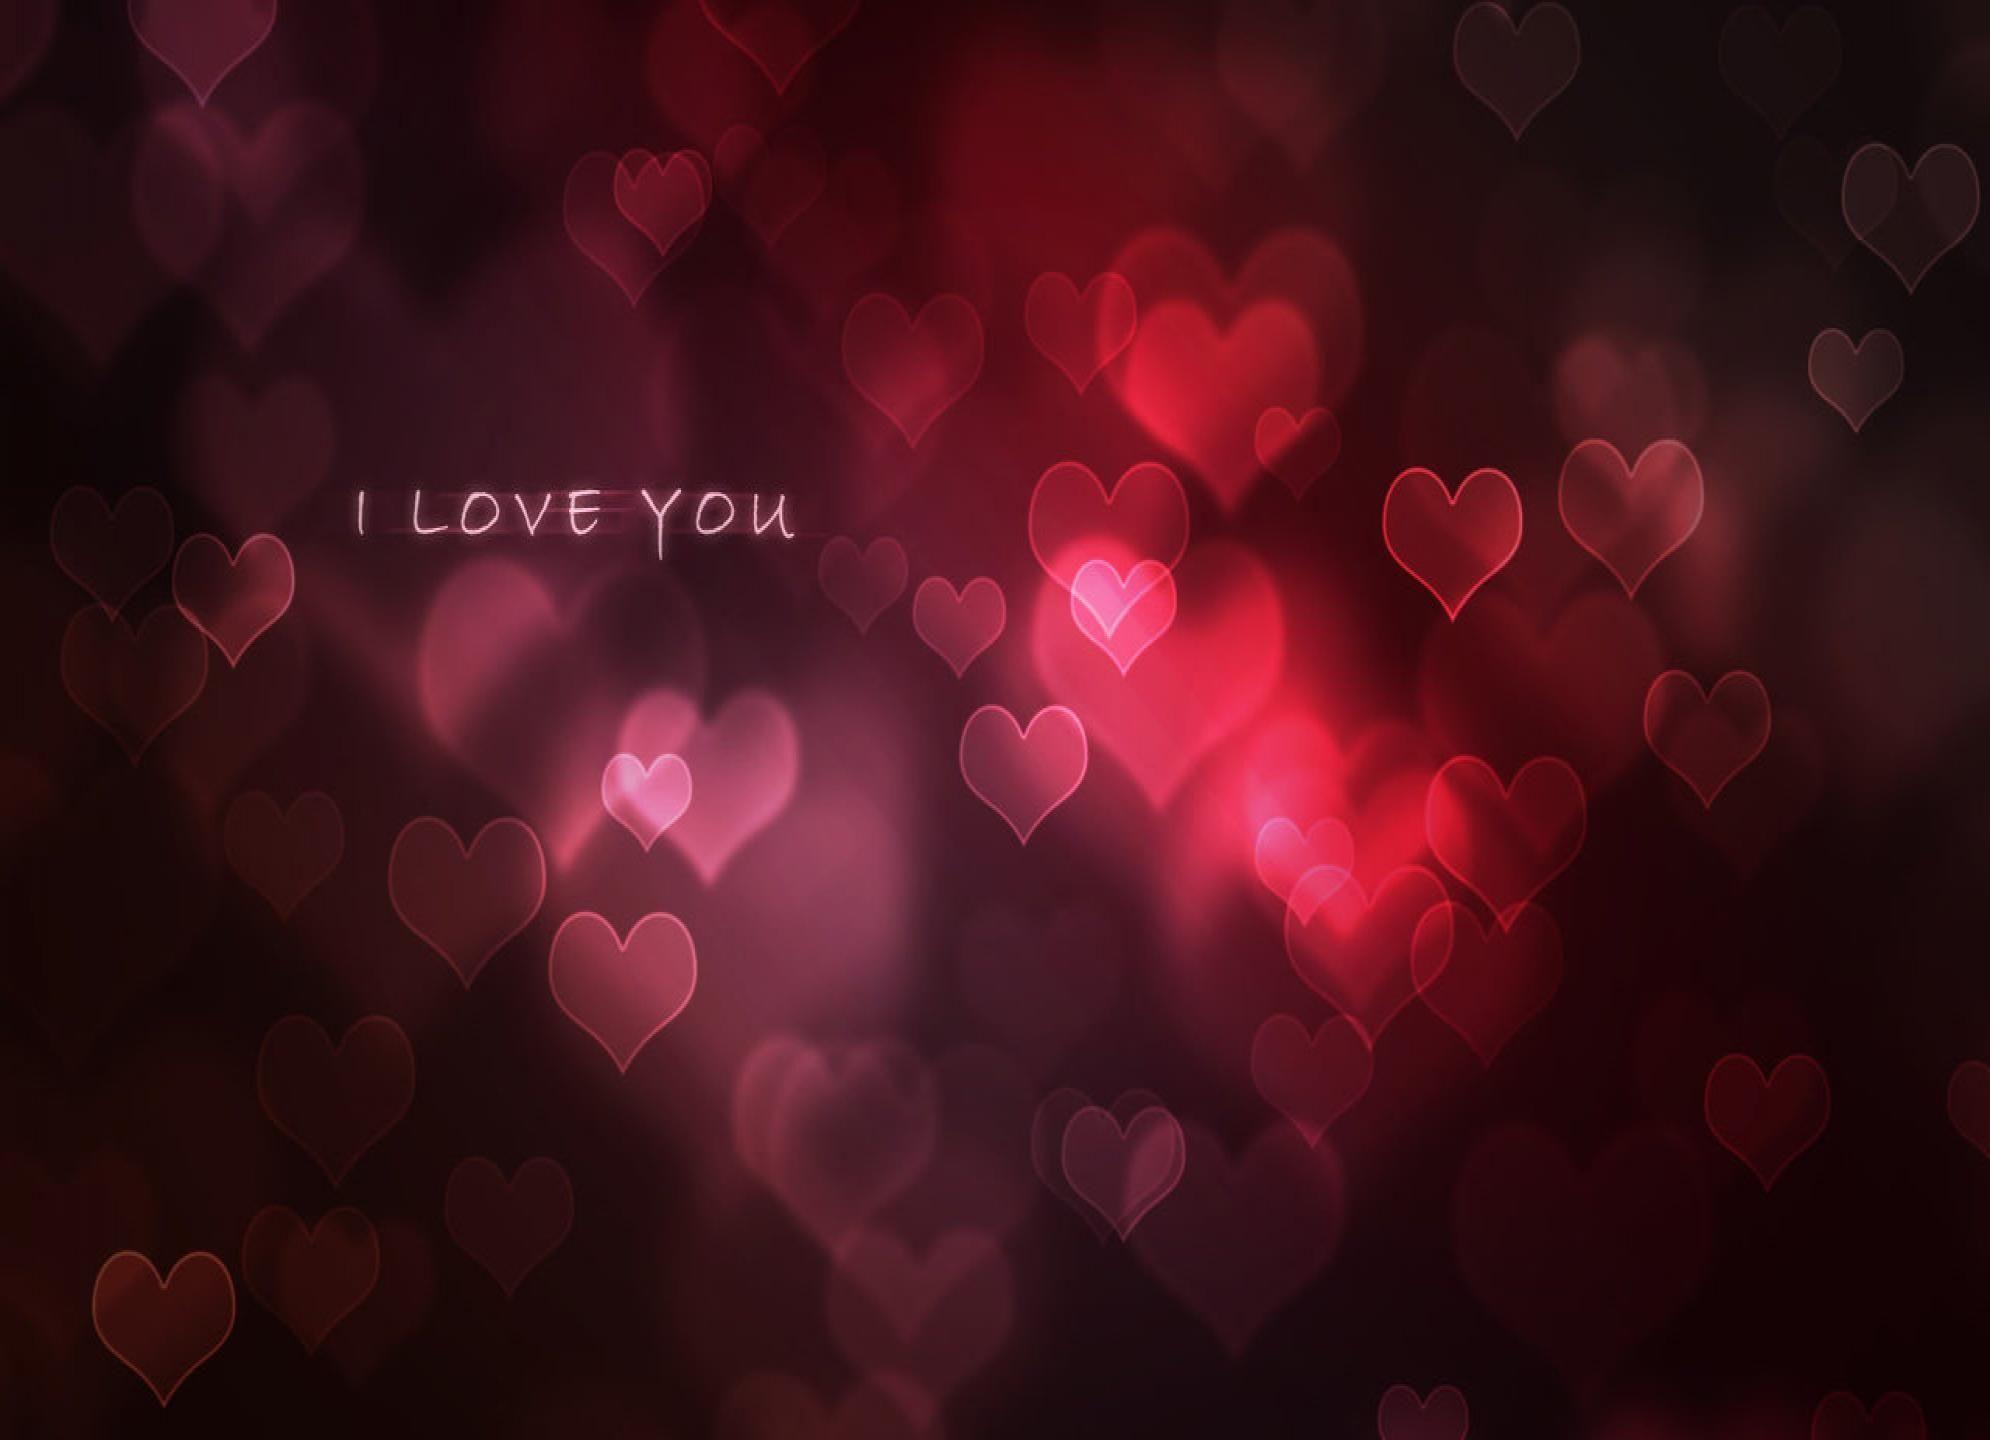 Love Wallpapers For Facebook Cover - Wallpaper Cave